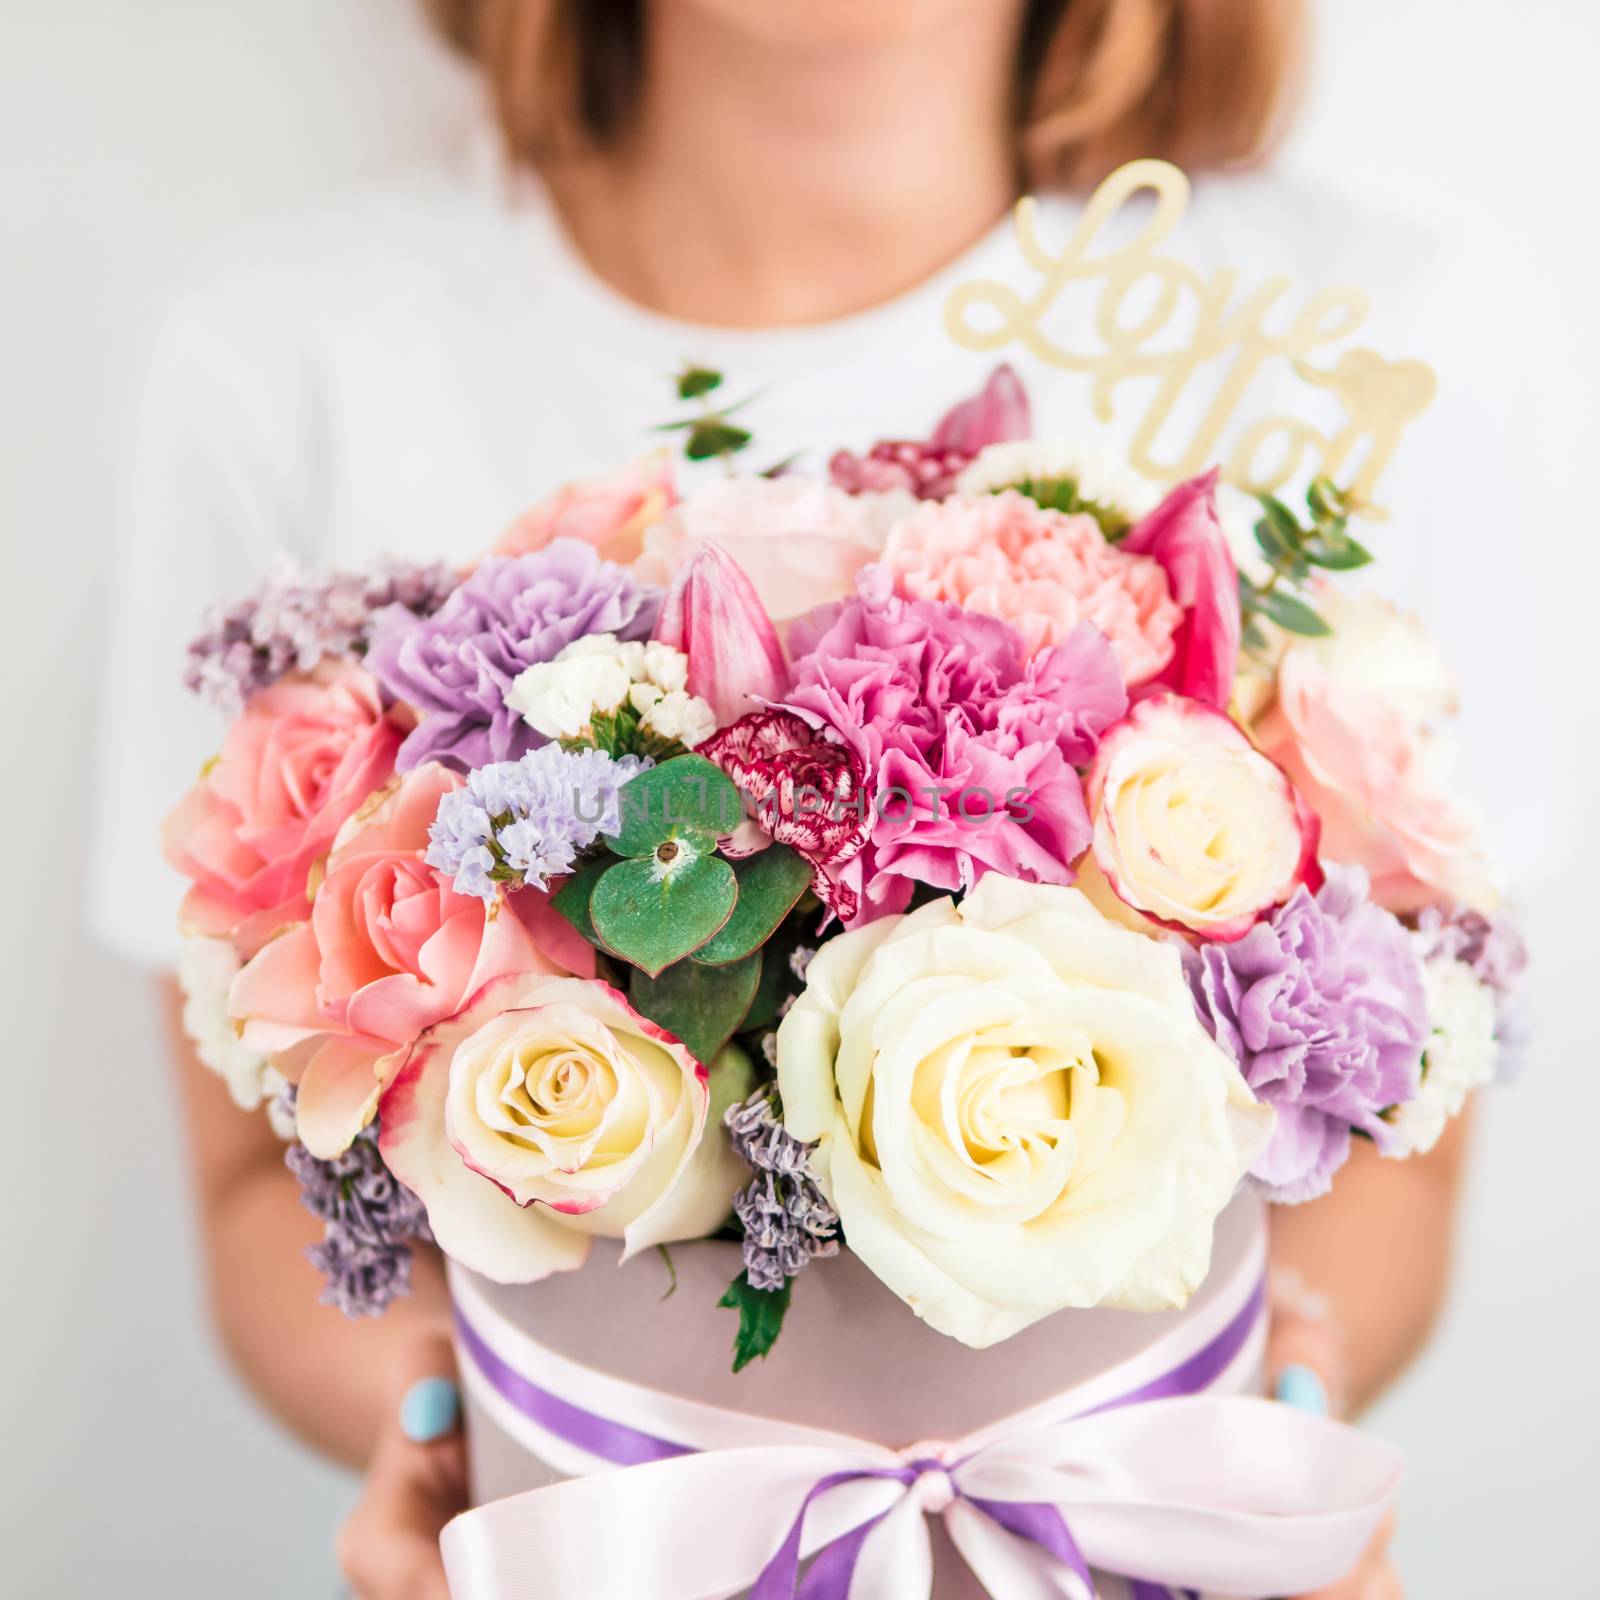 Beautiful bouquet with different flowers in woman hands. Bouquet with roses, dianthus, carnation bush, limonium, lilac and tulip. Shallow DOF, copy space. Top view. Square format for social media